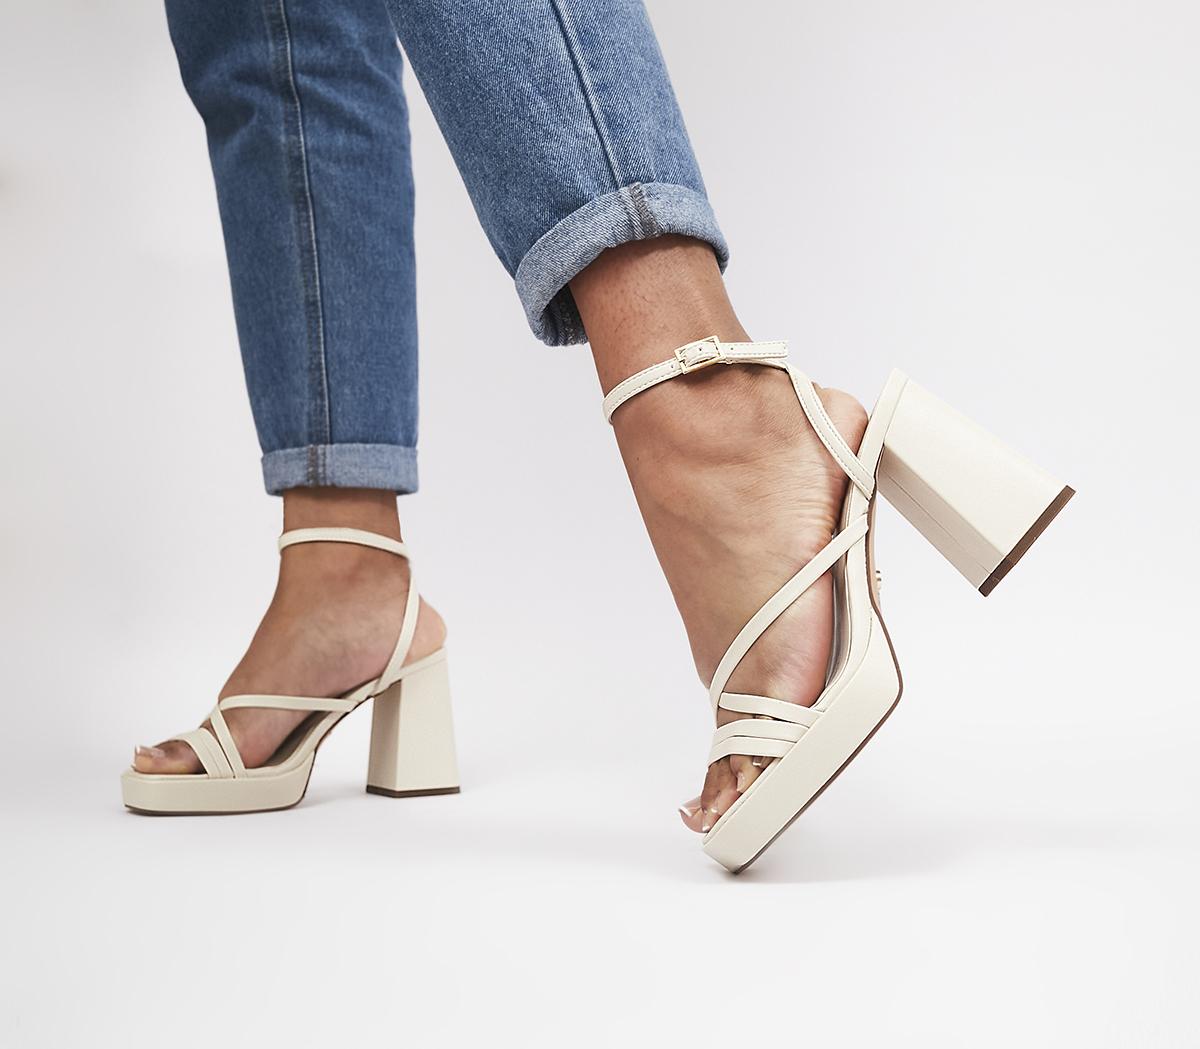 Find New Heights This Summer: How to Raise the Bar with our Platform Heel  Sandals